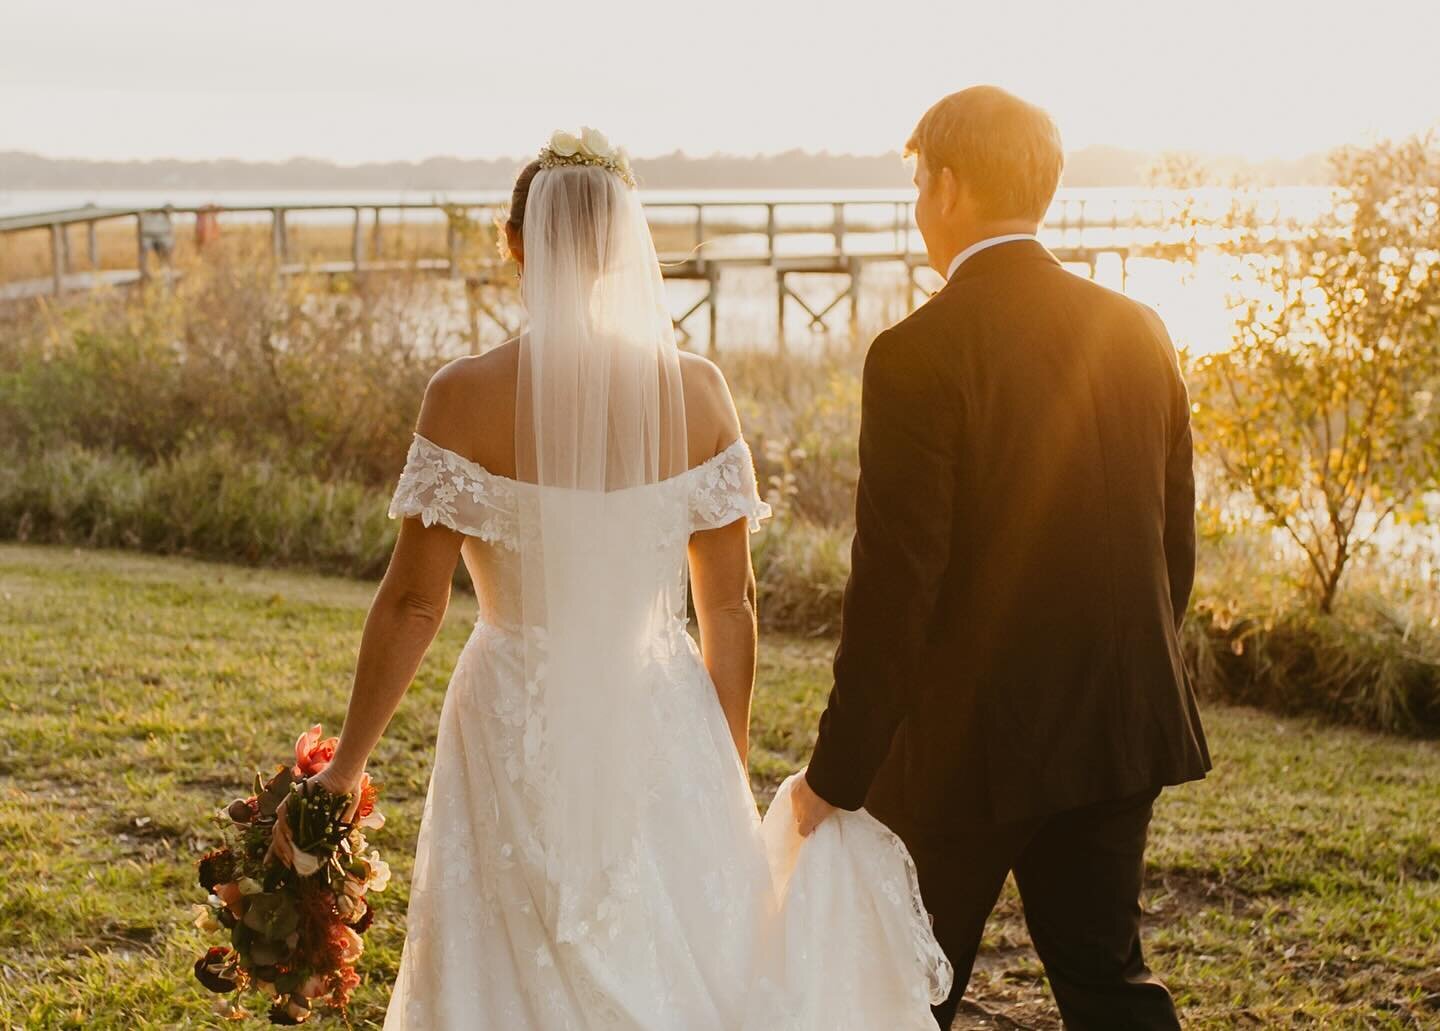 Jenny + Adam in their golden hour ✨ 

So grateful for every golden hour I get to spend with my people. It will never cease to amaze me how every single time the light/sunset hits &amp; shows off in different and unique ways... The colors are ever cha